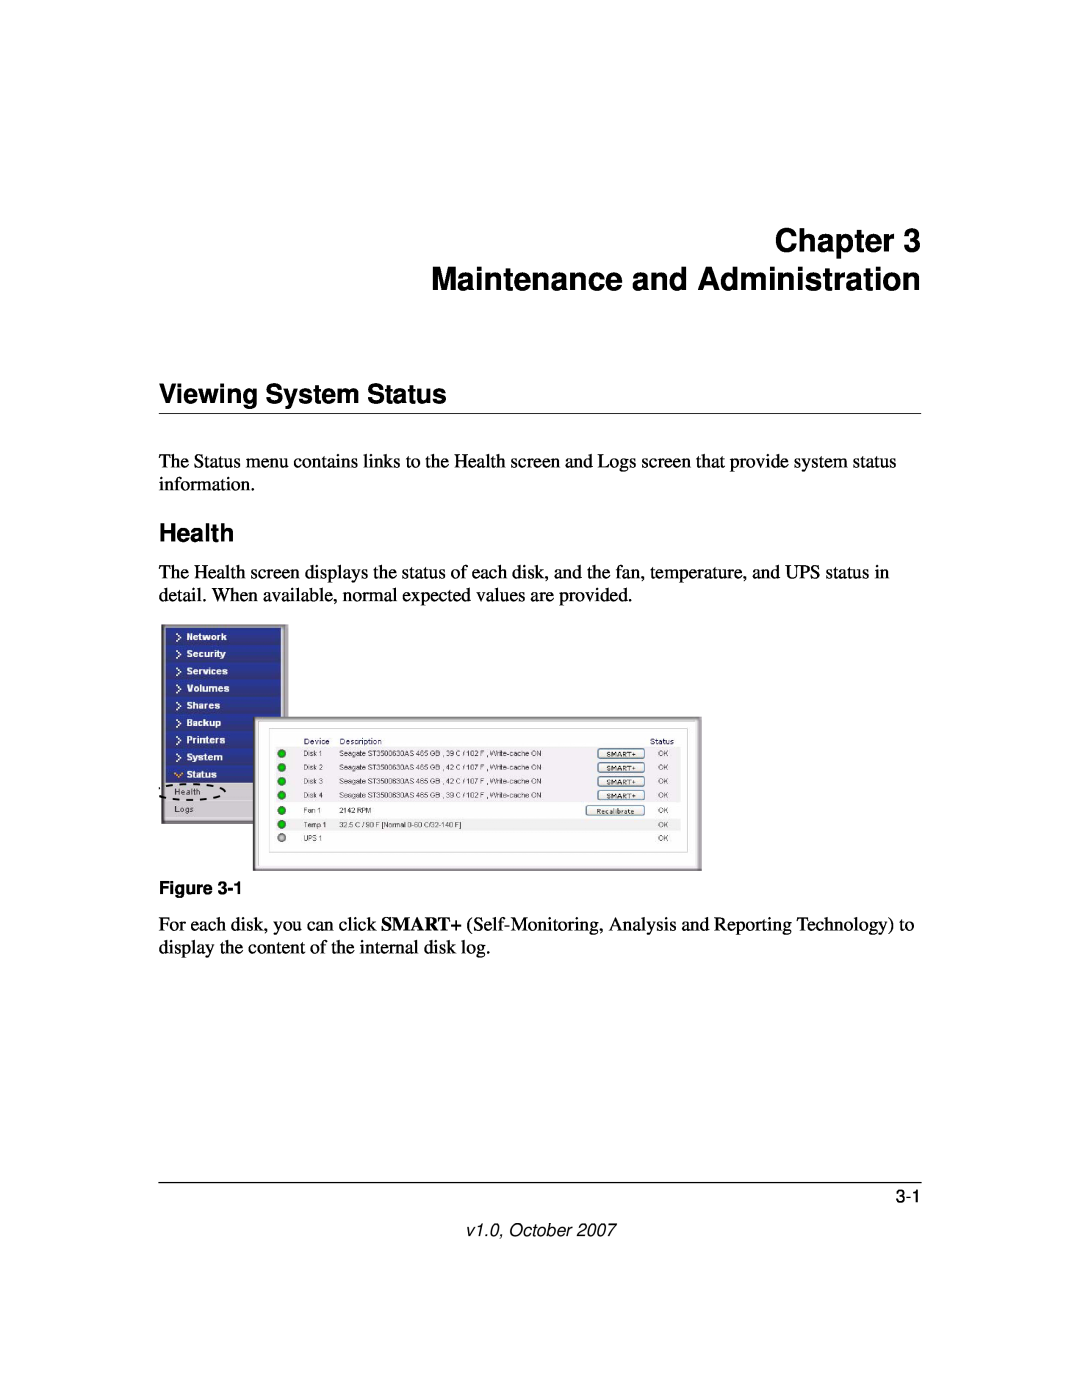 NETGEAR RN10223D-100NAS, RN31400-100NAS manual Chapter Maintenance and Administration, Viewing System Status, Health 